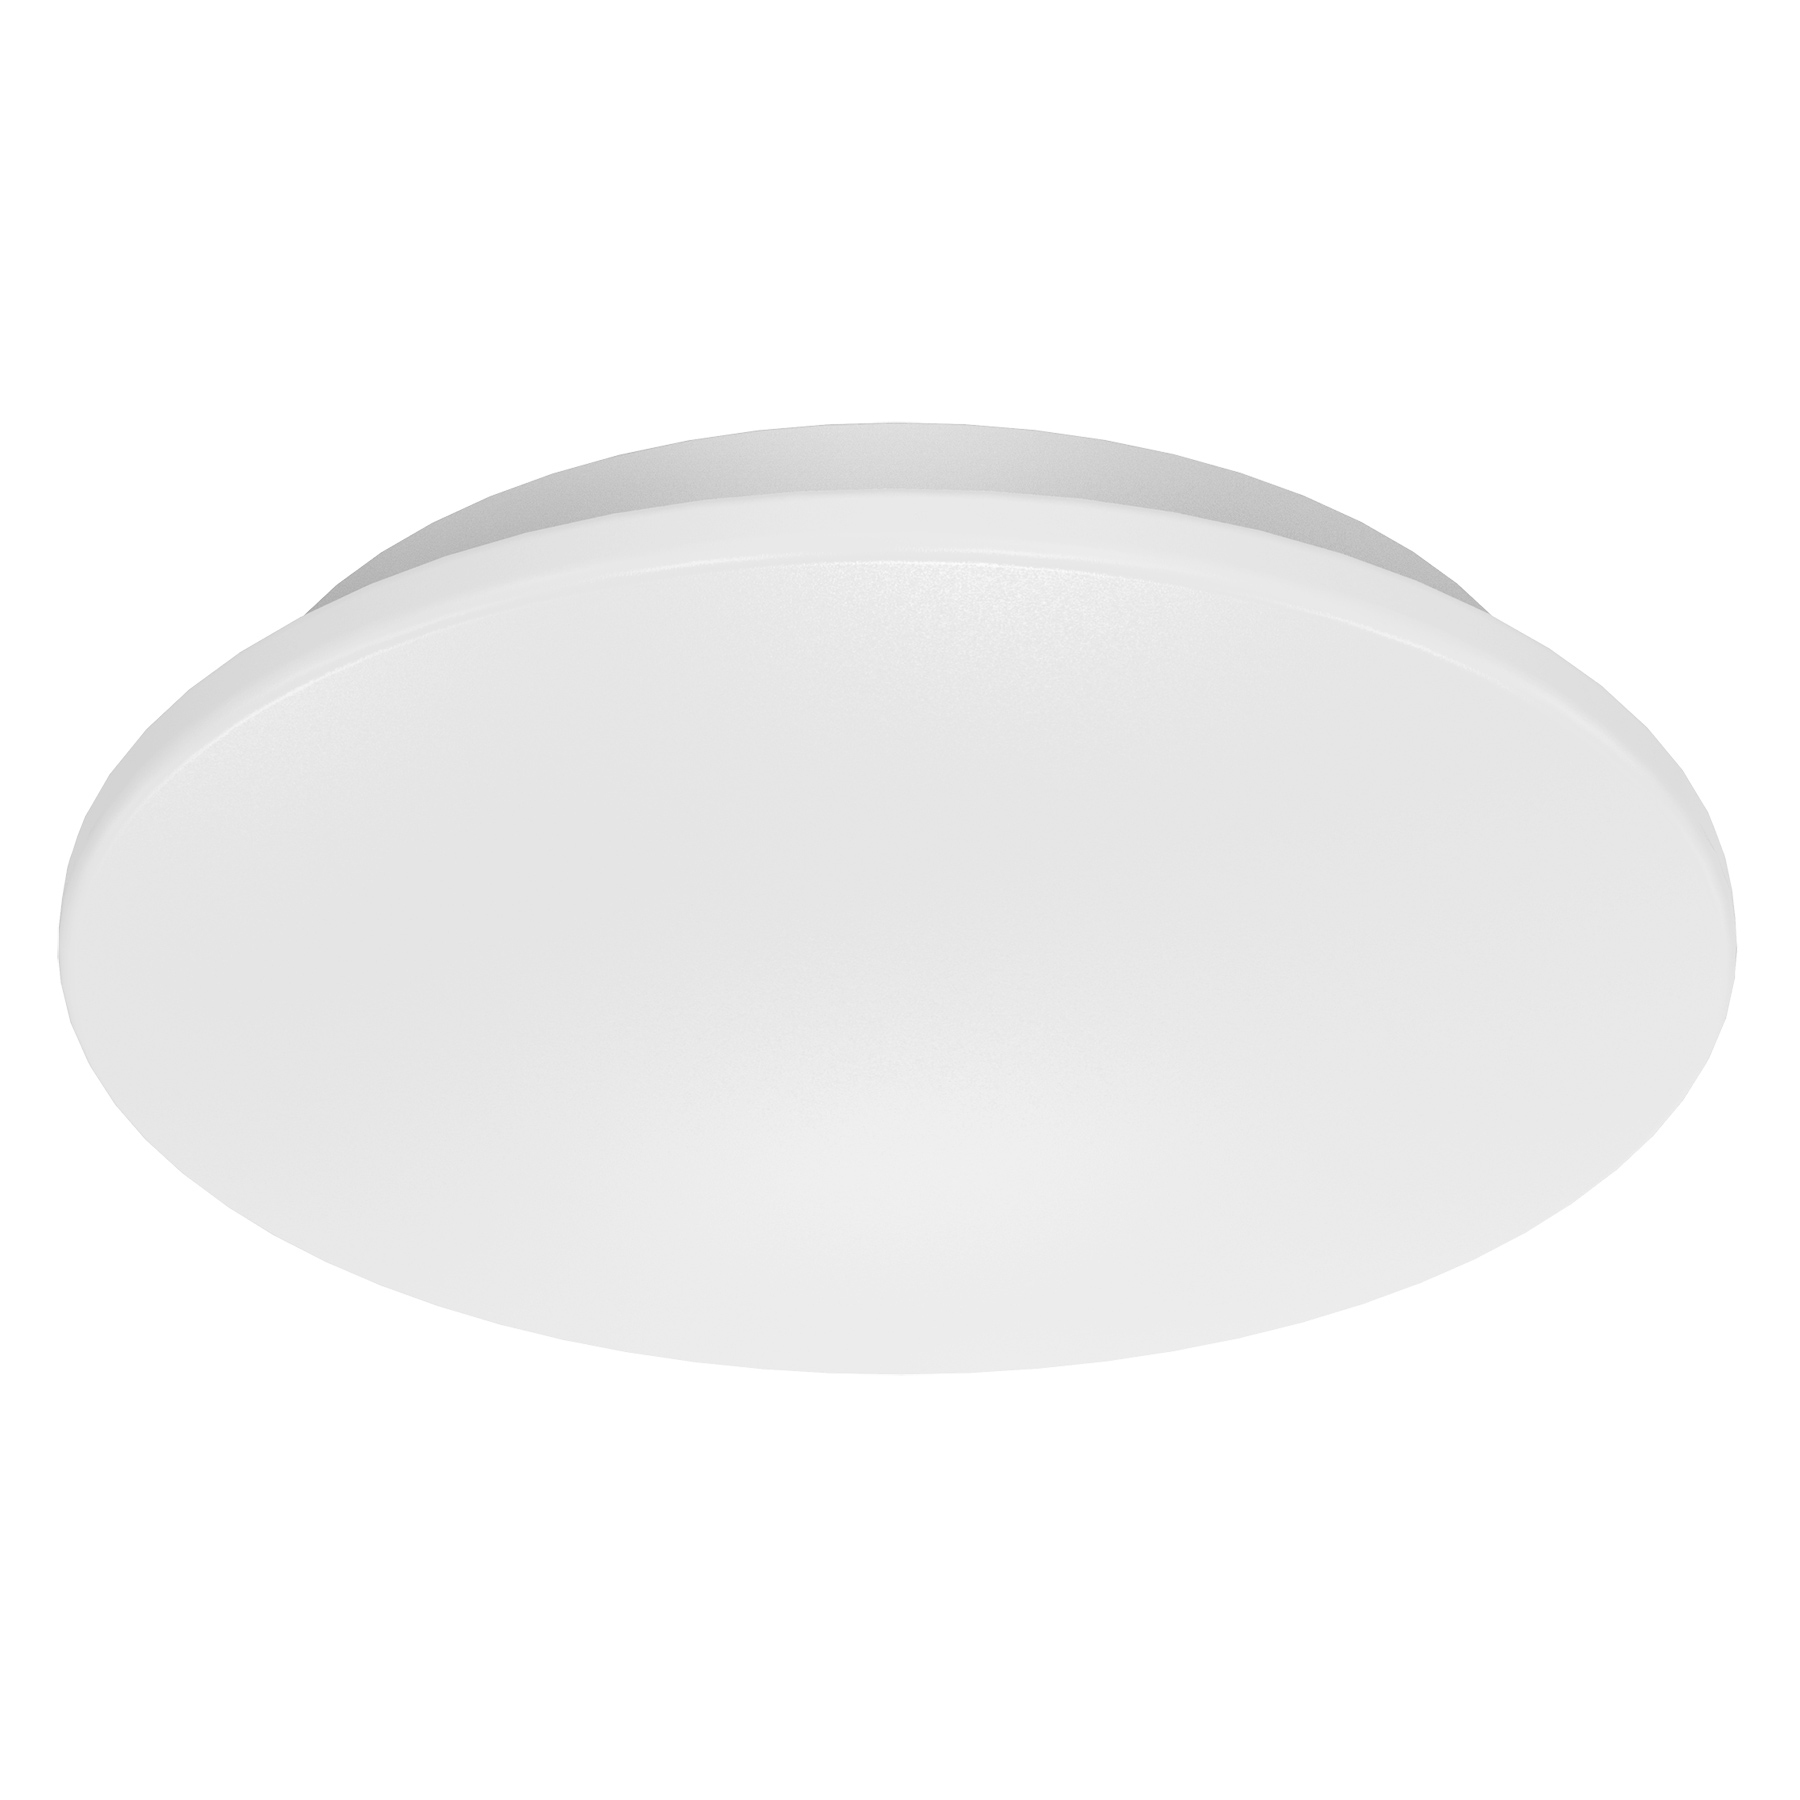 11 Inch Surface Mount Downlight with Frosted Lens